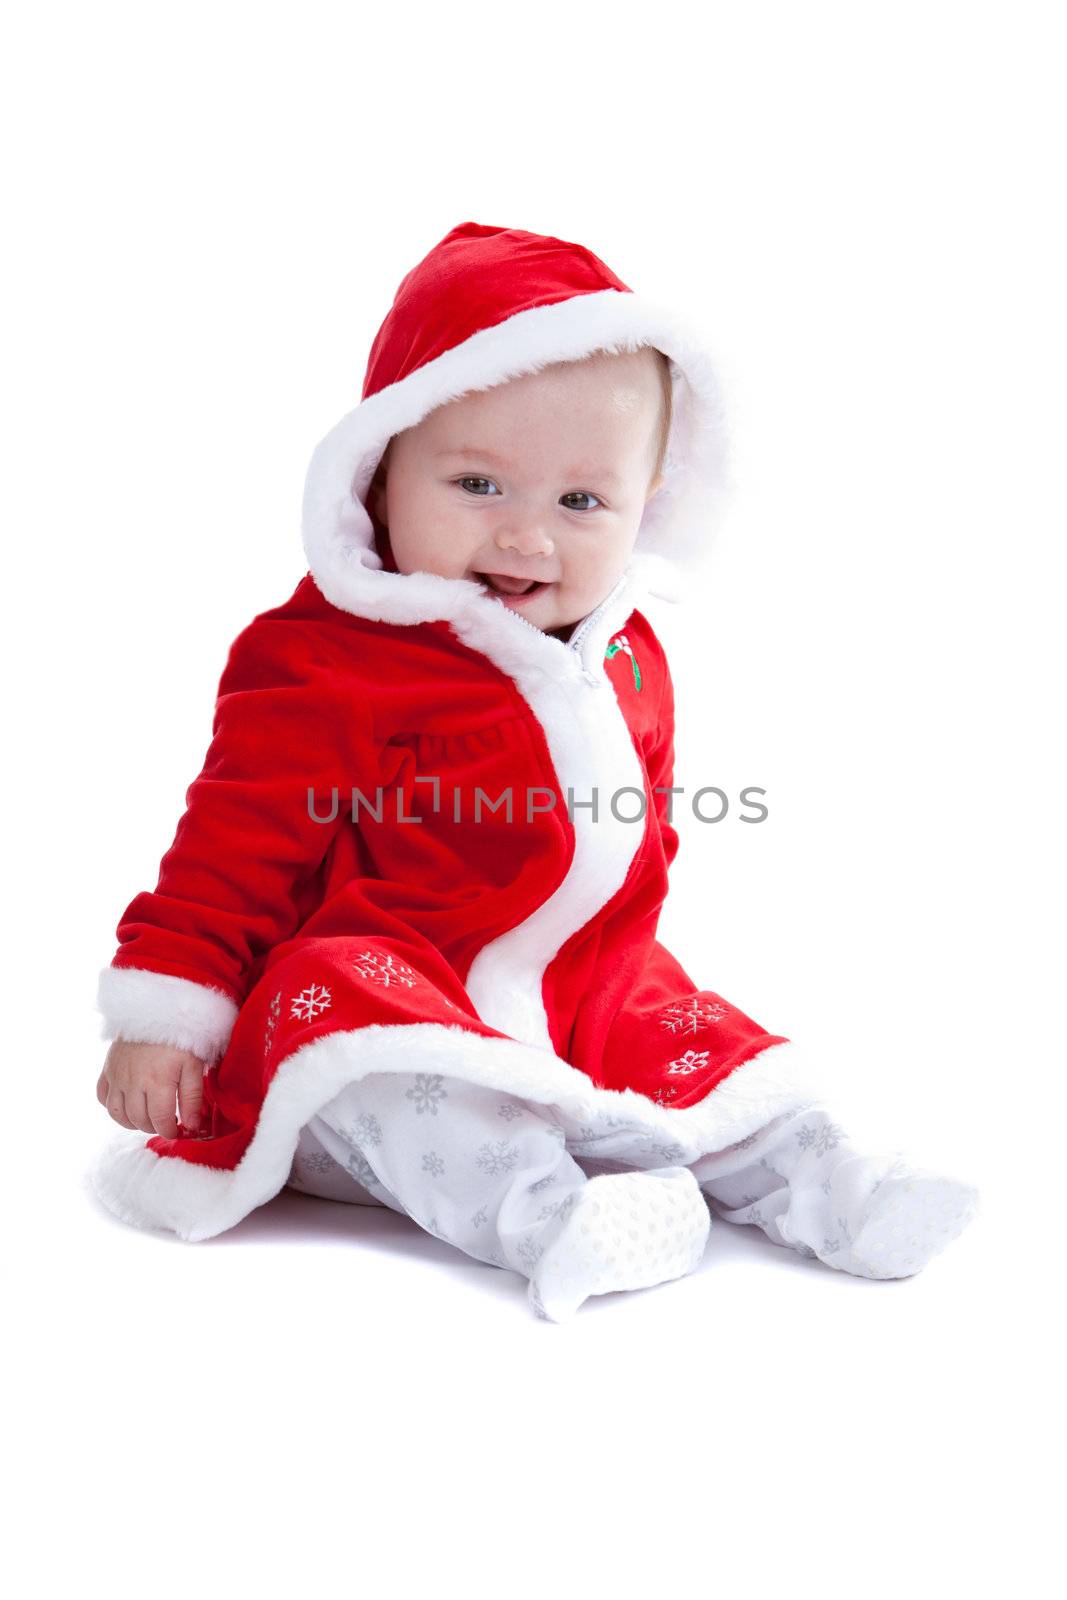 Adorable christmas baby by Fotosmurf